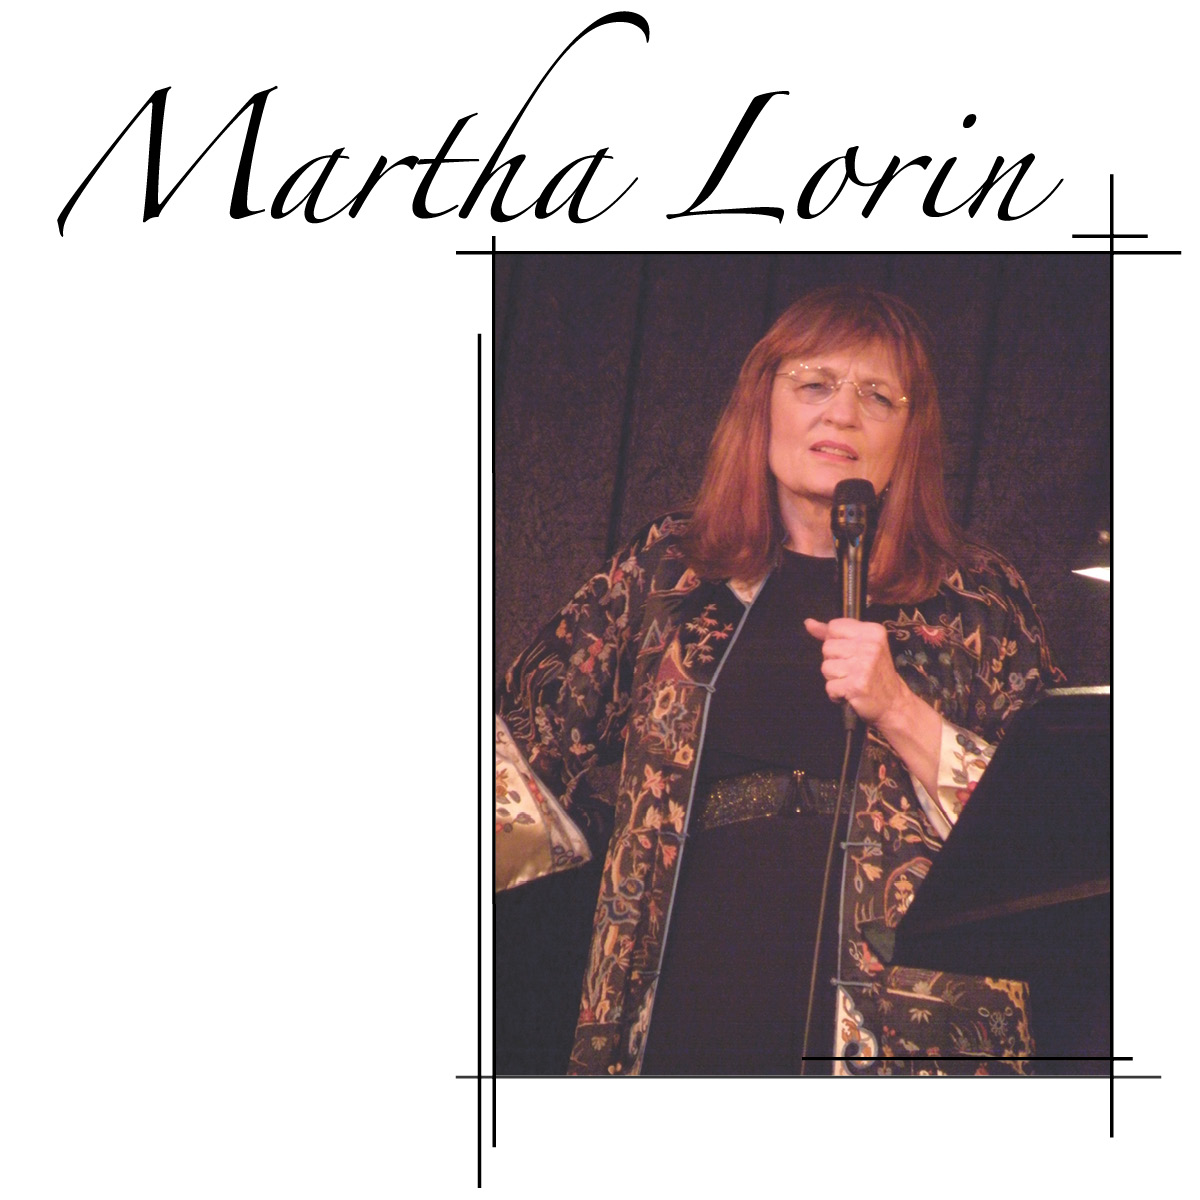 Lampkin Music Group Presents A CELEBRATION OF HAROLD ARLEN Featuring Martha Lorin at DON'T TELL MAMA DEC 18 1 Lampkin Music Group proudly presents</p>
<p>
vocalist   Martha Lorin
pianist   John di Martino
bassist   Harvey S
Encore Performance
 
A CELEBRATION OF HAROLD ARLEN
Through the interpretations of jazz singers and musicians who performed Arlen’s songs!</p>
<p>
DON'T TELL MAMA
343 WEST 46TH STREET
DECEMBER 18TH, 2014 AT 7:30 P.M.
TICKETS ARE $20.00/ TWO DRINK MINIMUM
($5.00 discount with MAC Cards)
RSVP FOR YOUR SEATS NOW AT 212-757-0788
www.donttellmamanyc.com
 
on Martha:
Review by Marilyn Lester....Theaterpizzazz.com. Nov. 20, 14.
"The vocal half of the duo, Martha Lorin, possesses a smooth, smoky voice that wraps around notes with poise and ease. Lorin may be the coolest cat since Peggy Lee to bless a jazz stage. From the first number, “I’ve Got The World On A String” (lyrics by Koehler), to the last, “Come Rain Or Come Shine” (lyrics by Mercer), Lorin eased her way through a variety of tunes with a sophisticated, personable and often amusing delivery. Lorin’s approach is, over all, astute and discerning. “I Got A Right To Sing The Blues” (lyrics by Koehler) and “Blues In The Night” (lyrics by Mercer), rather than angst-ridden, for example, were treated with intelligent respect for the meaning of the lyric – much in the same way that the great Ella Fitzgerald put across her blues numbers."
 
On John di Martino:
Todd Barkan, Jazz Times
John de Martino is a melodic & harmonic magician who brings a large helping of unique wonderfulness to a musical journey."
 
On Harvie S:
John Barron - Jazz Times …"utilizing blistering runs, double stops and chords, leaving no doubts about his stature makes Harvie S one of the preeminent bass voices in jazz today”. Martha Lorin
www.marthalorin.com